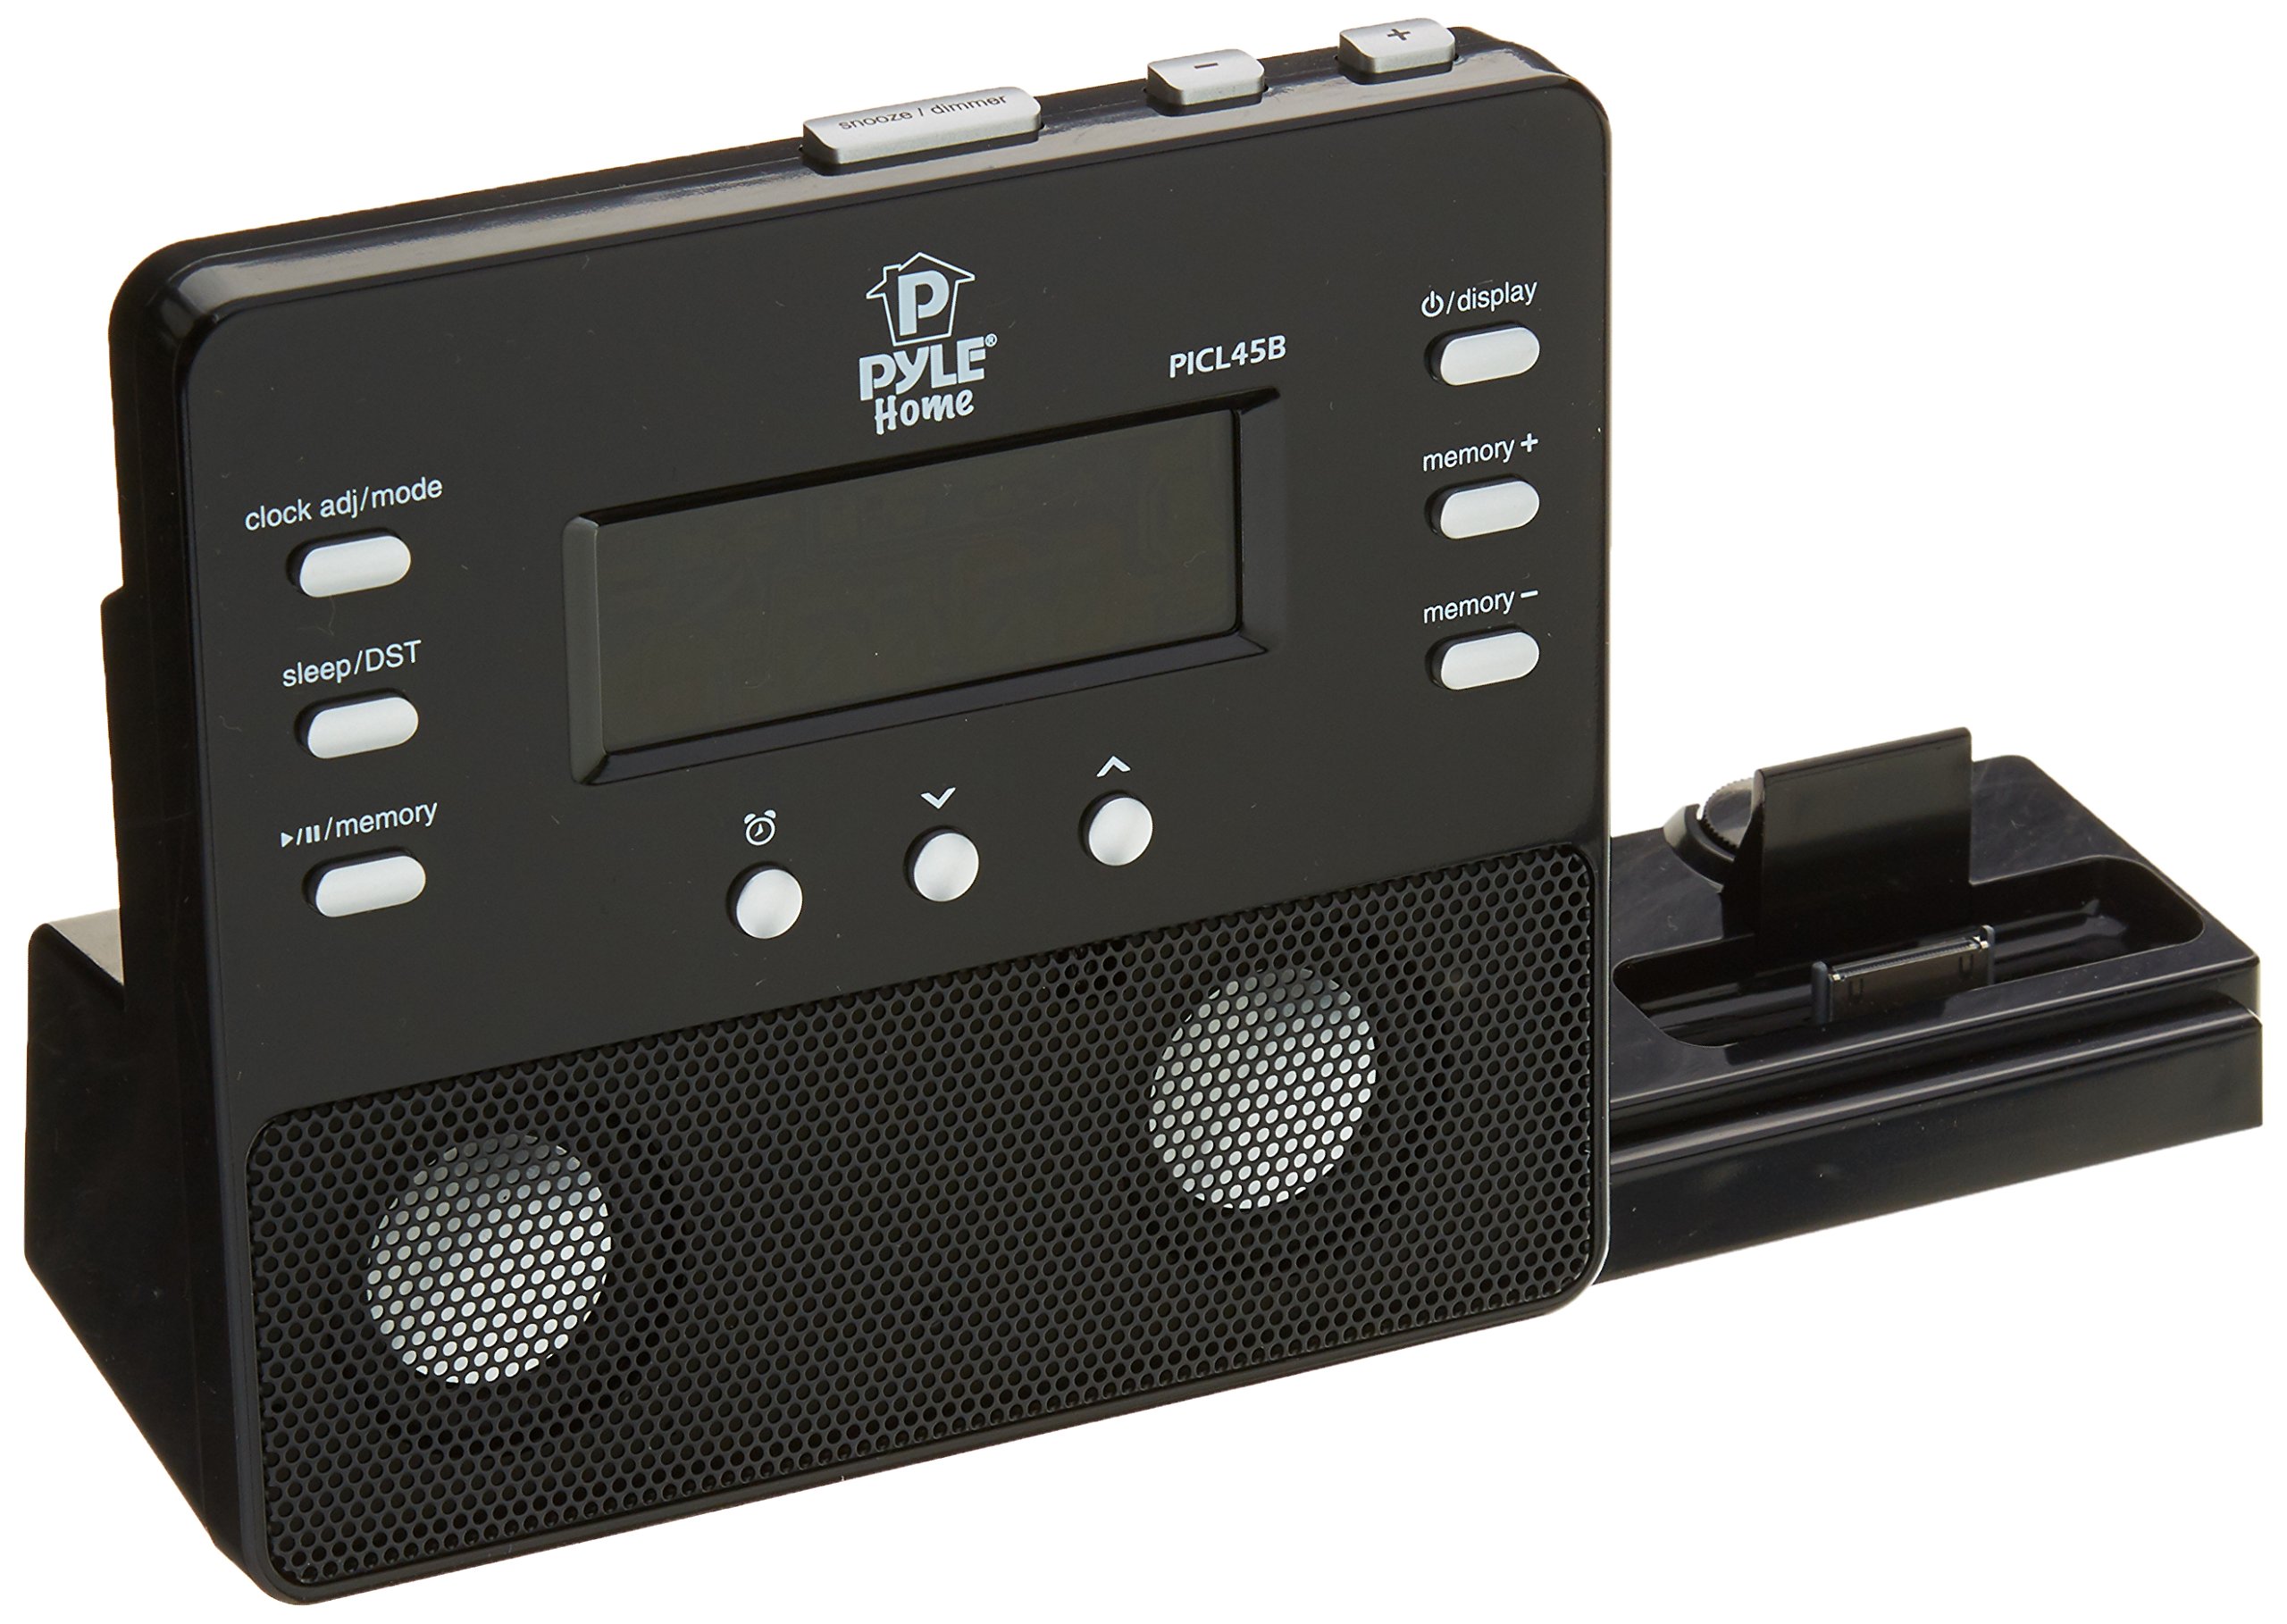 Pyle Home PICL45B Enhanced iPod/iPhone Alarm Clock Speaker System with AM/FM/Radio and Remote Control (Black)